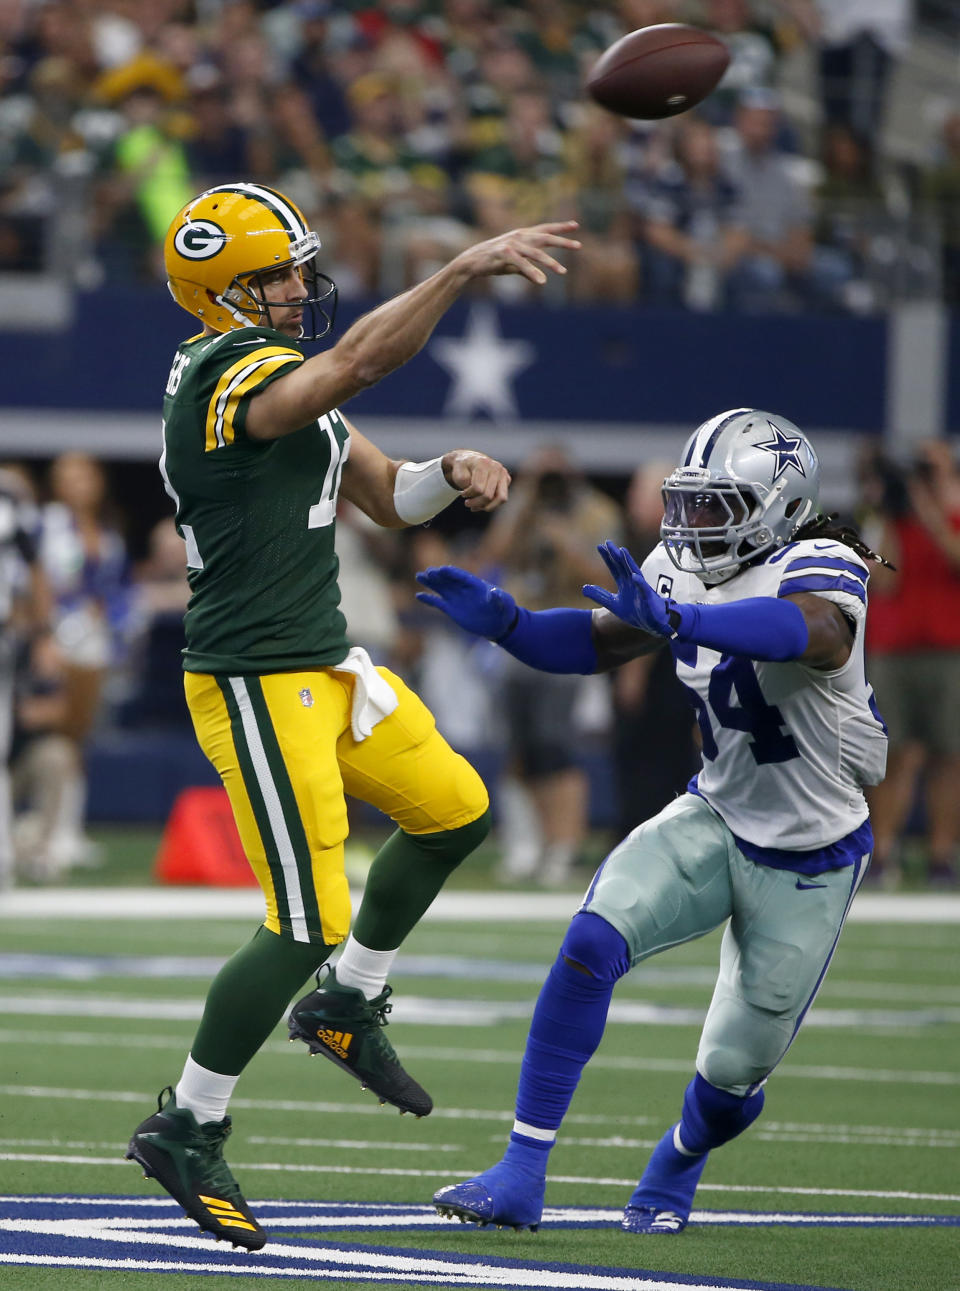 Green Bay Packers quarterback Aaron Rodgers, left, throws a pass as Dallas Cowboys middle linebacker Jaylon Smith (54) defends in the first half of an NFL football game in Arlington, Texas, Sunday, Oct. 6, 2019. (AP Photo/Ron Jenkins)